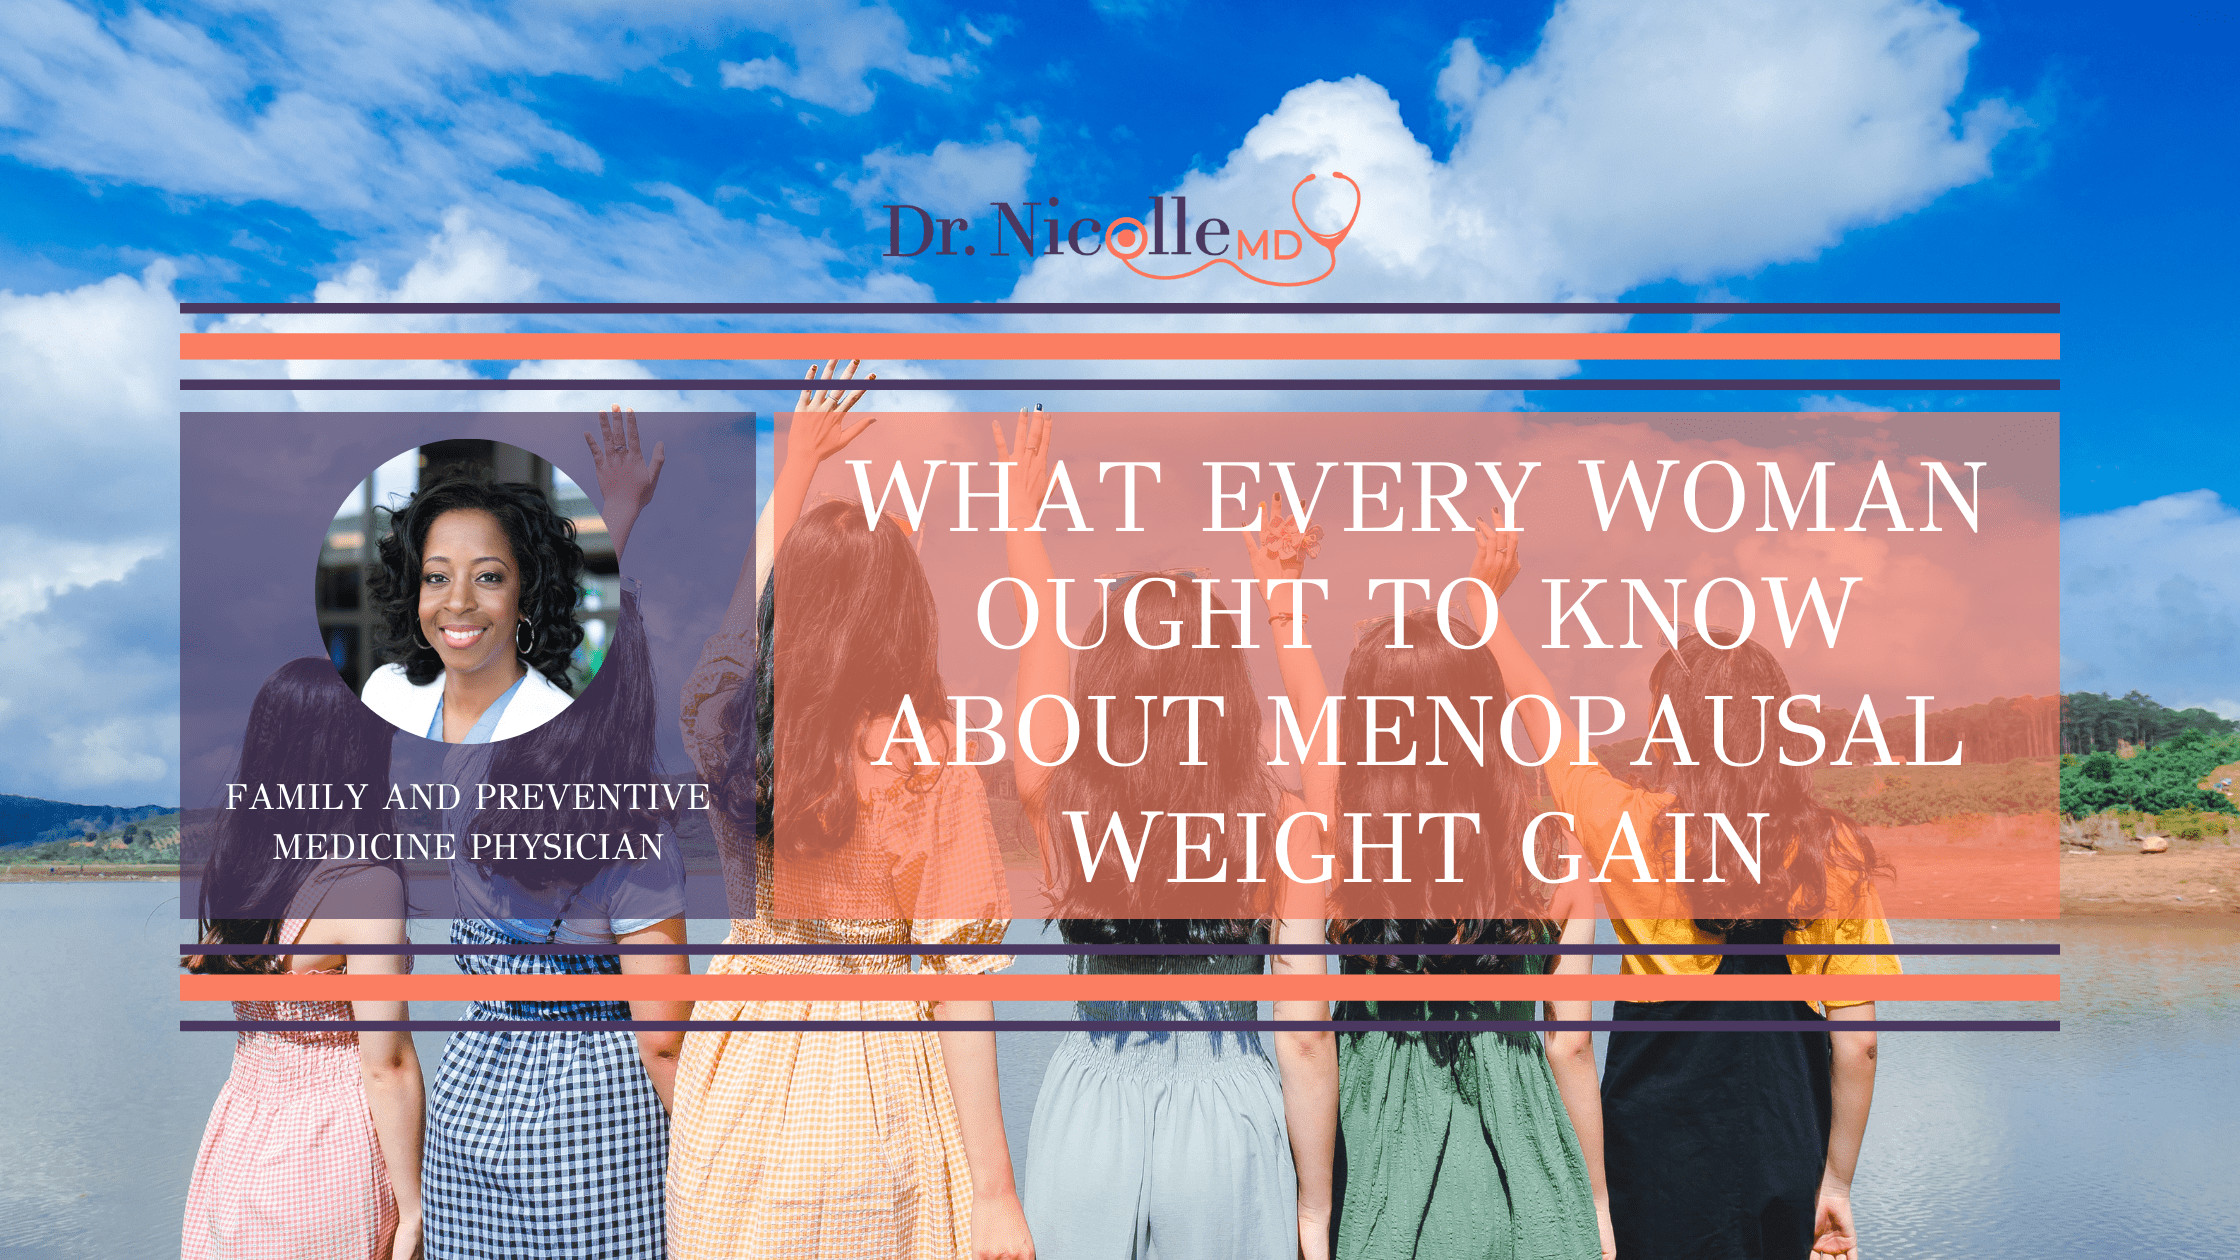 11What-Every-Woman-Ought-to-Know-About-Menopausal-Weight-Gain